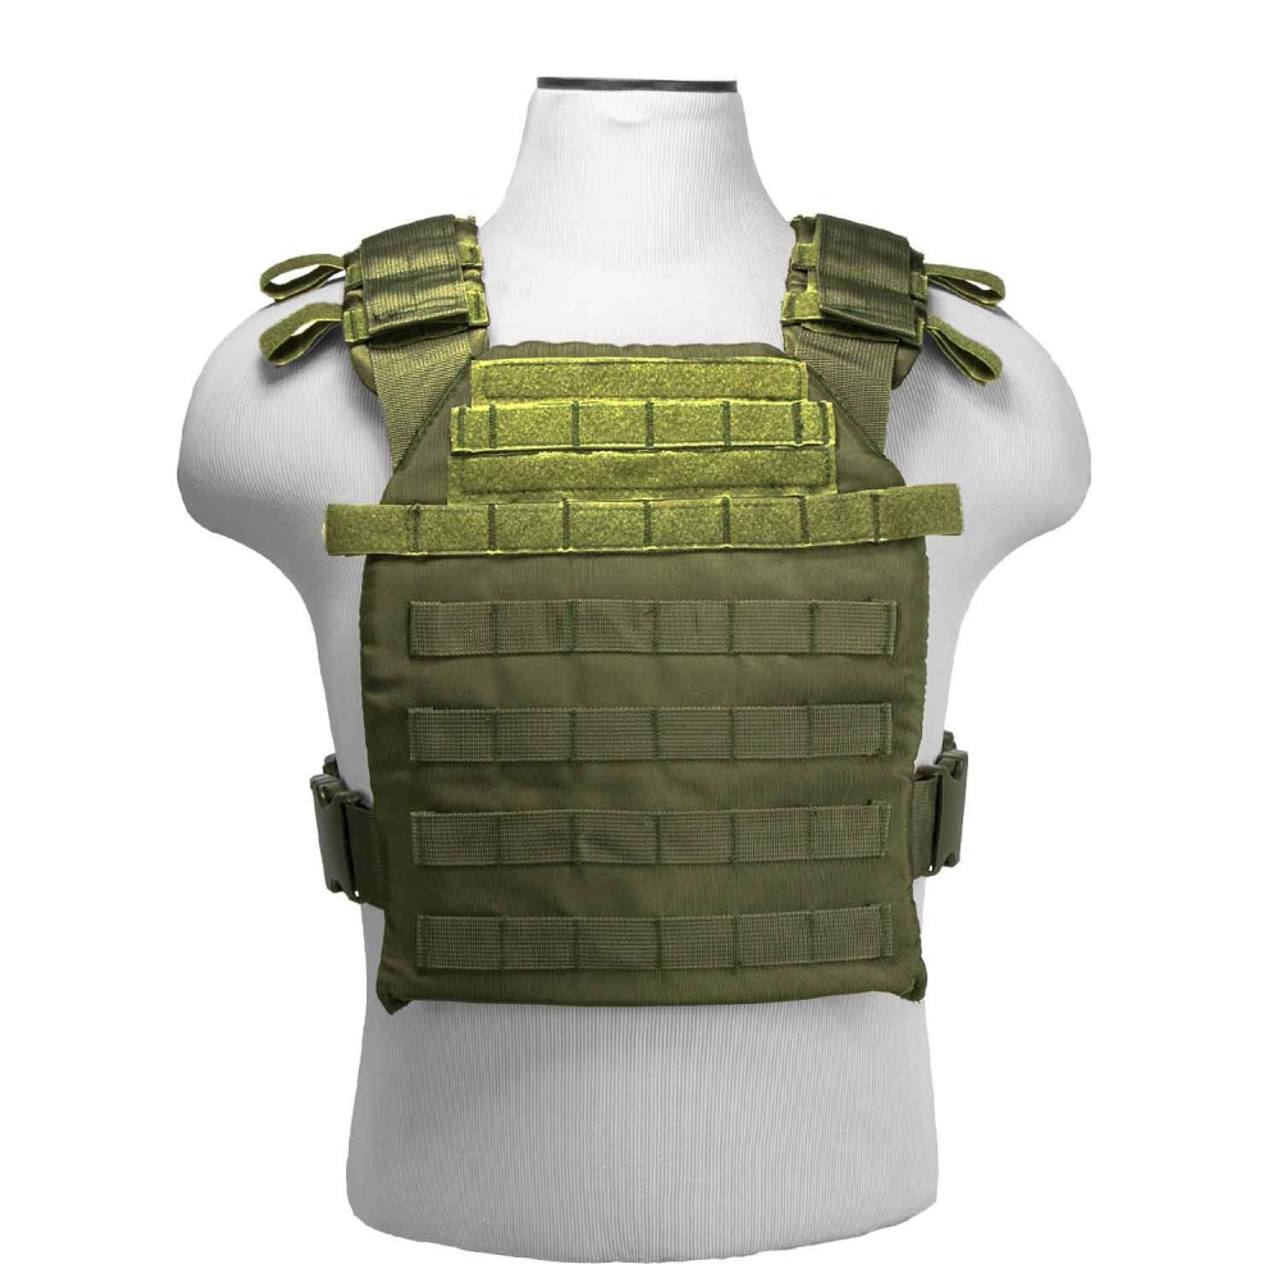 NcSTAR CVPCF2995G Fast Plate Carrier For 10"X12" Plates